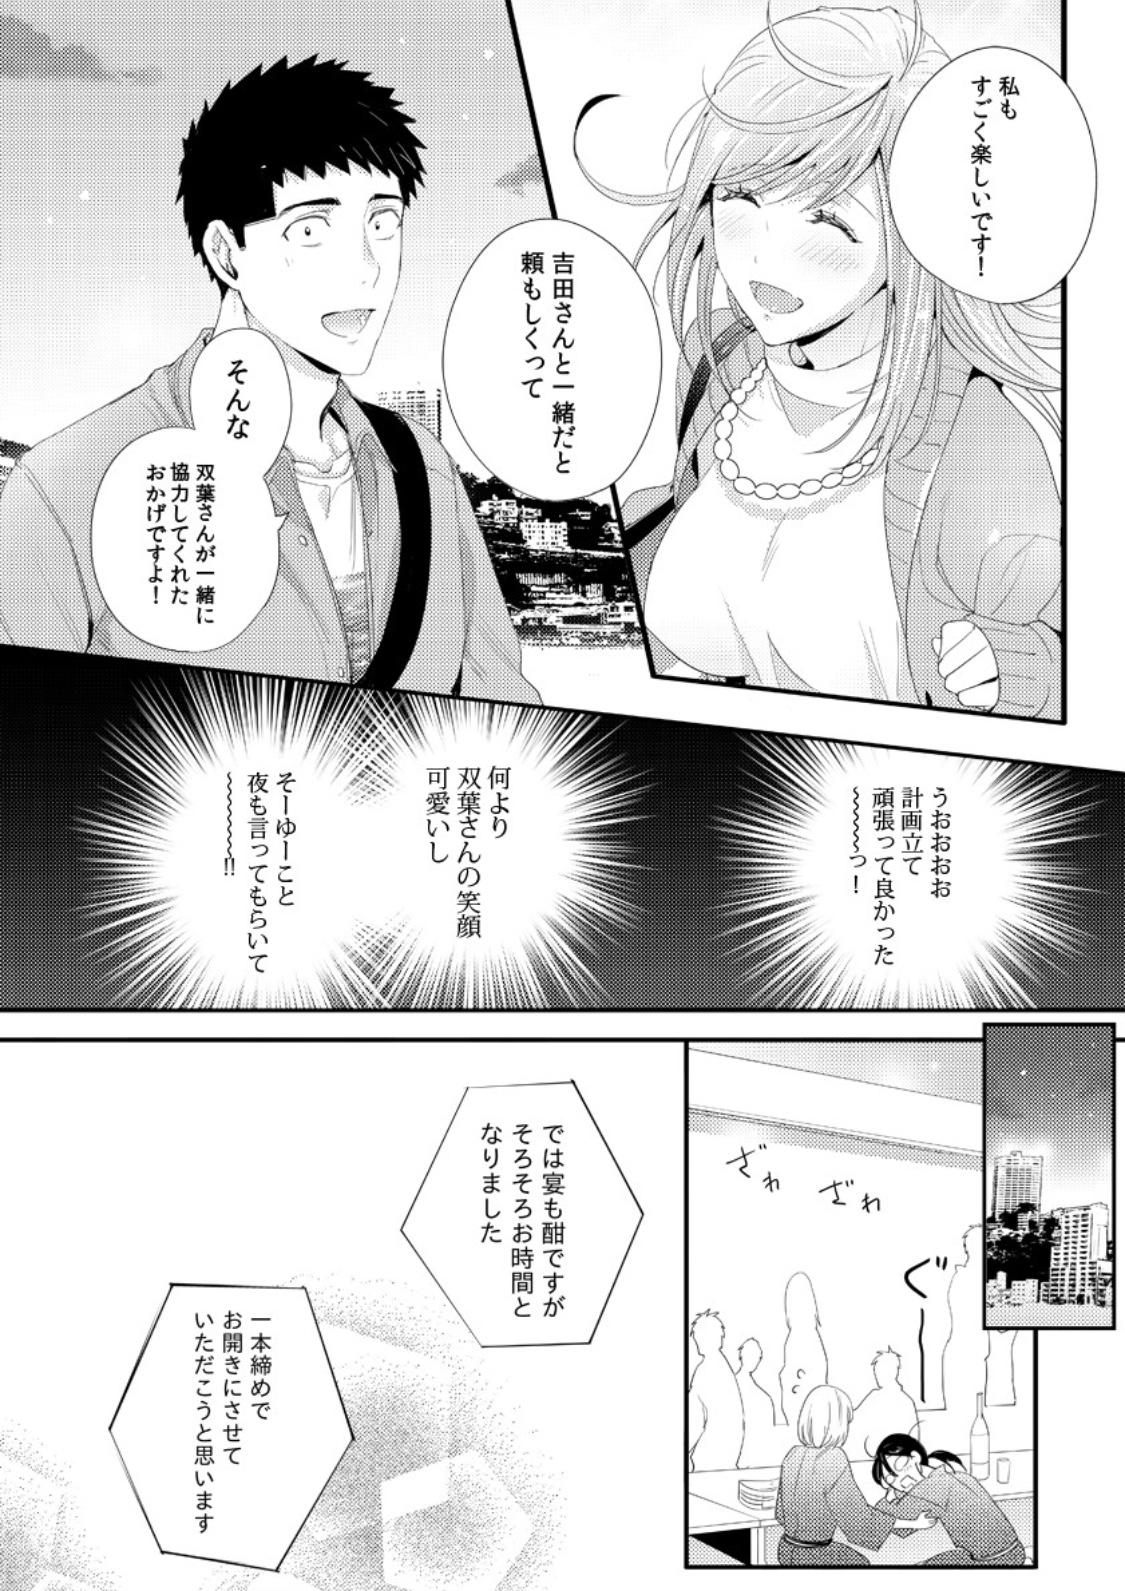 Please Let Me Hold You Futaba-San! Ch. 1+2 9